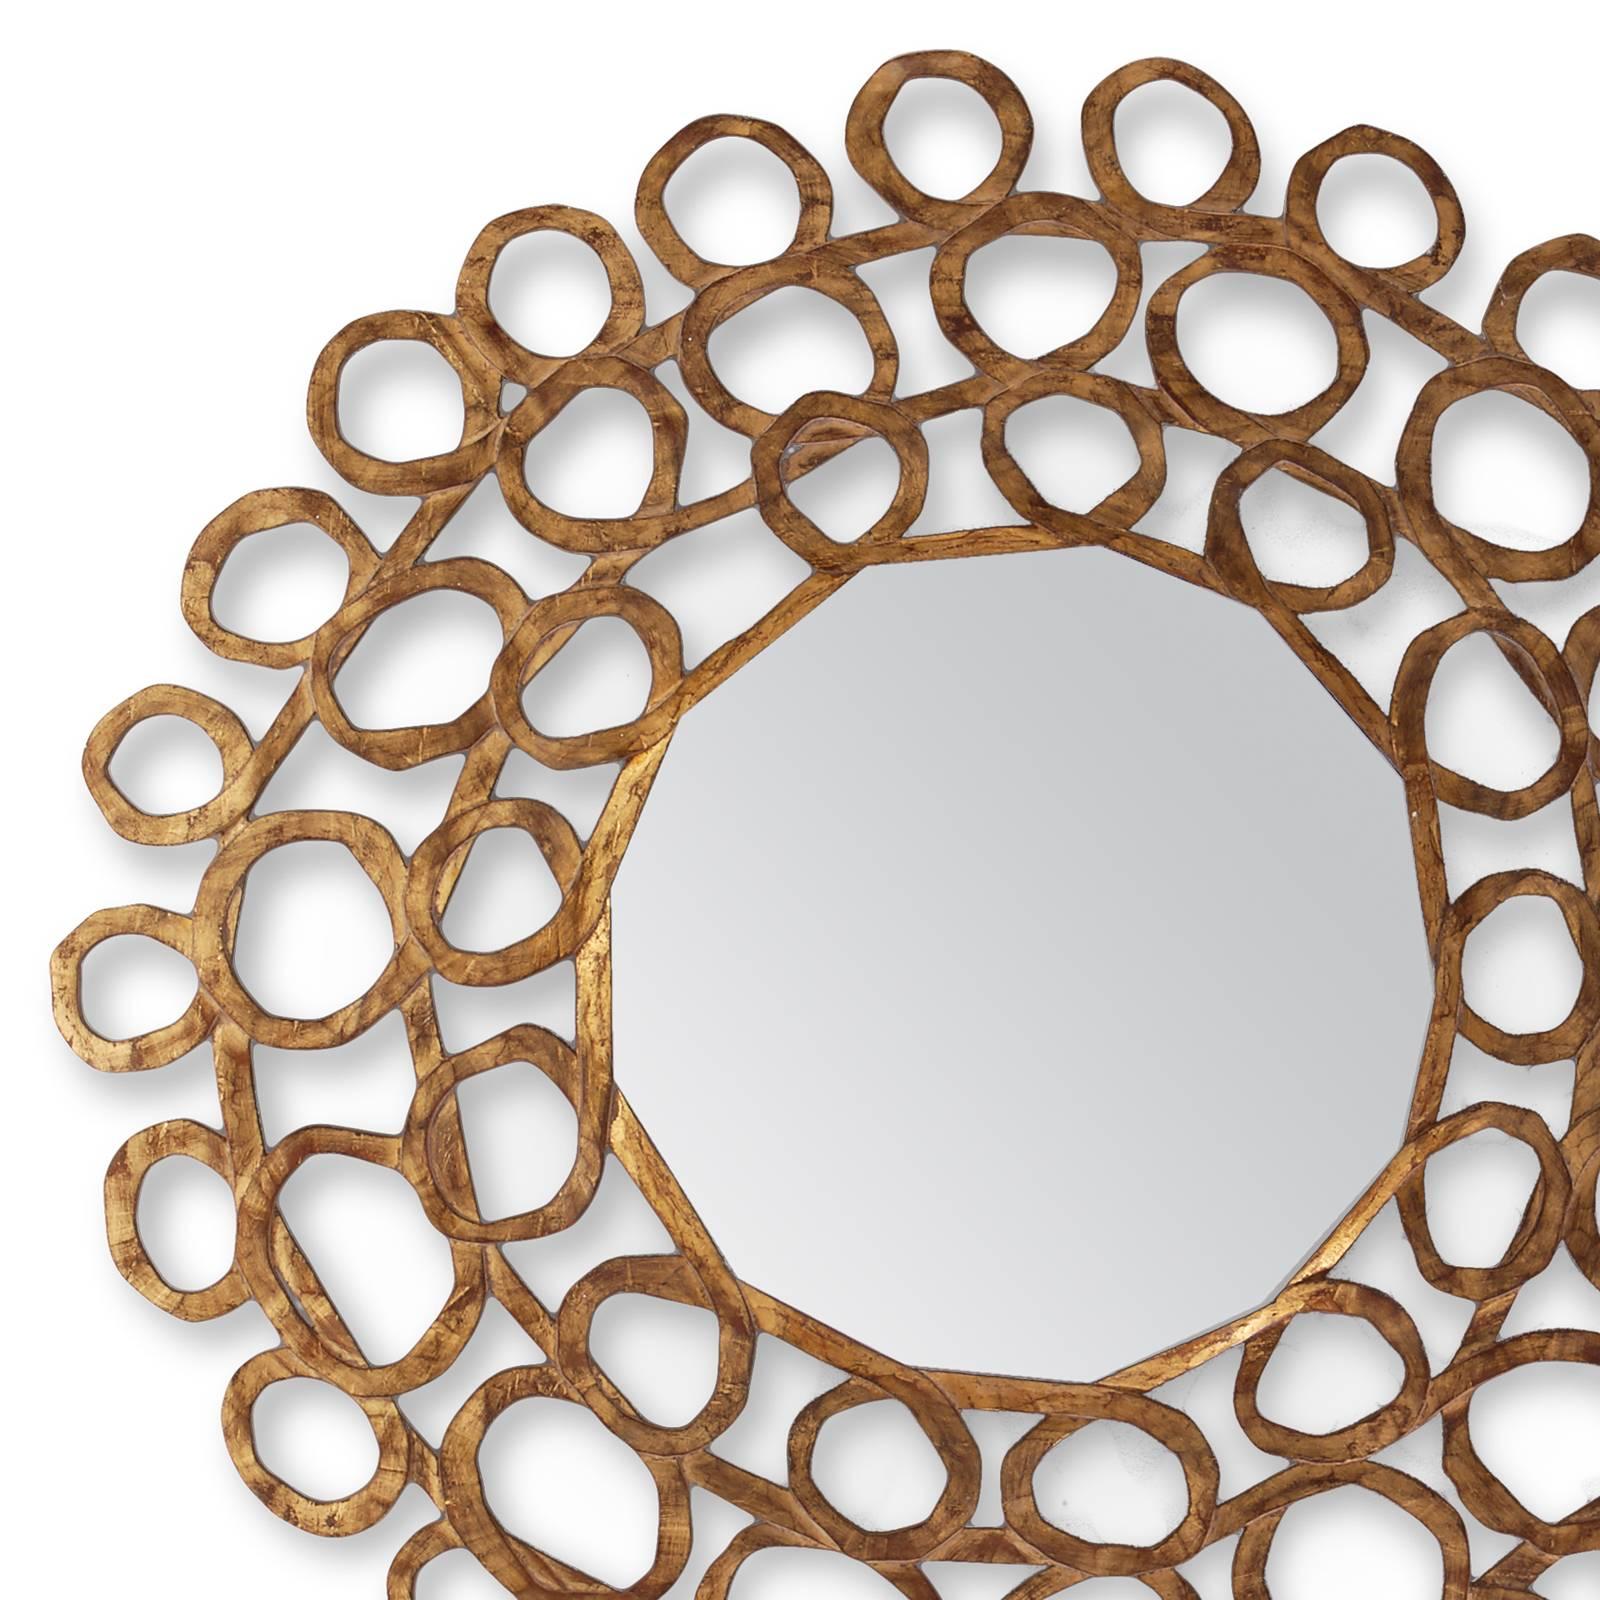 Mirror gold curls with hand-carved structure in solid 
wood hand-painted with old gold finish. With center
mirror glass. In L 134 x D 04 x H 134cm, price 7900,00€
Also available in L 112 x D 04 x H 112cm, price 6900,00€.